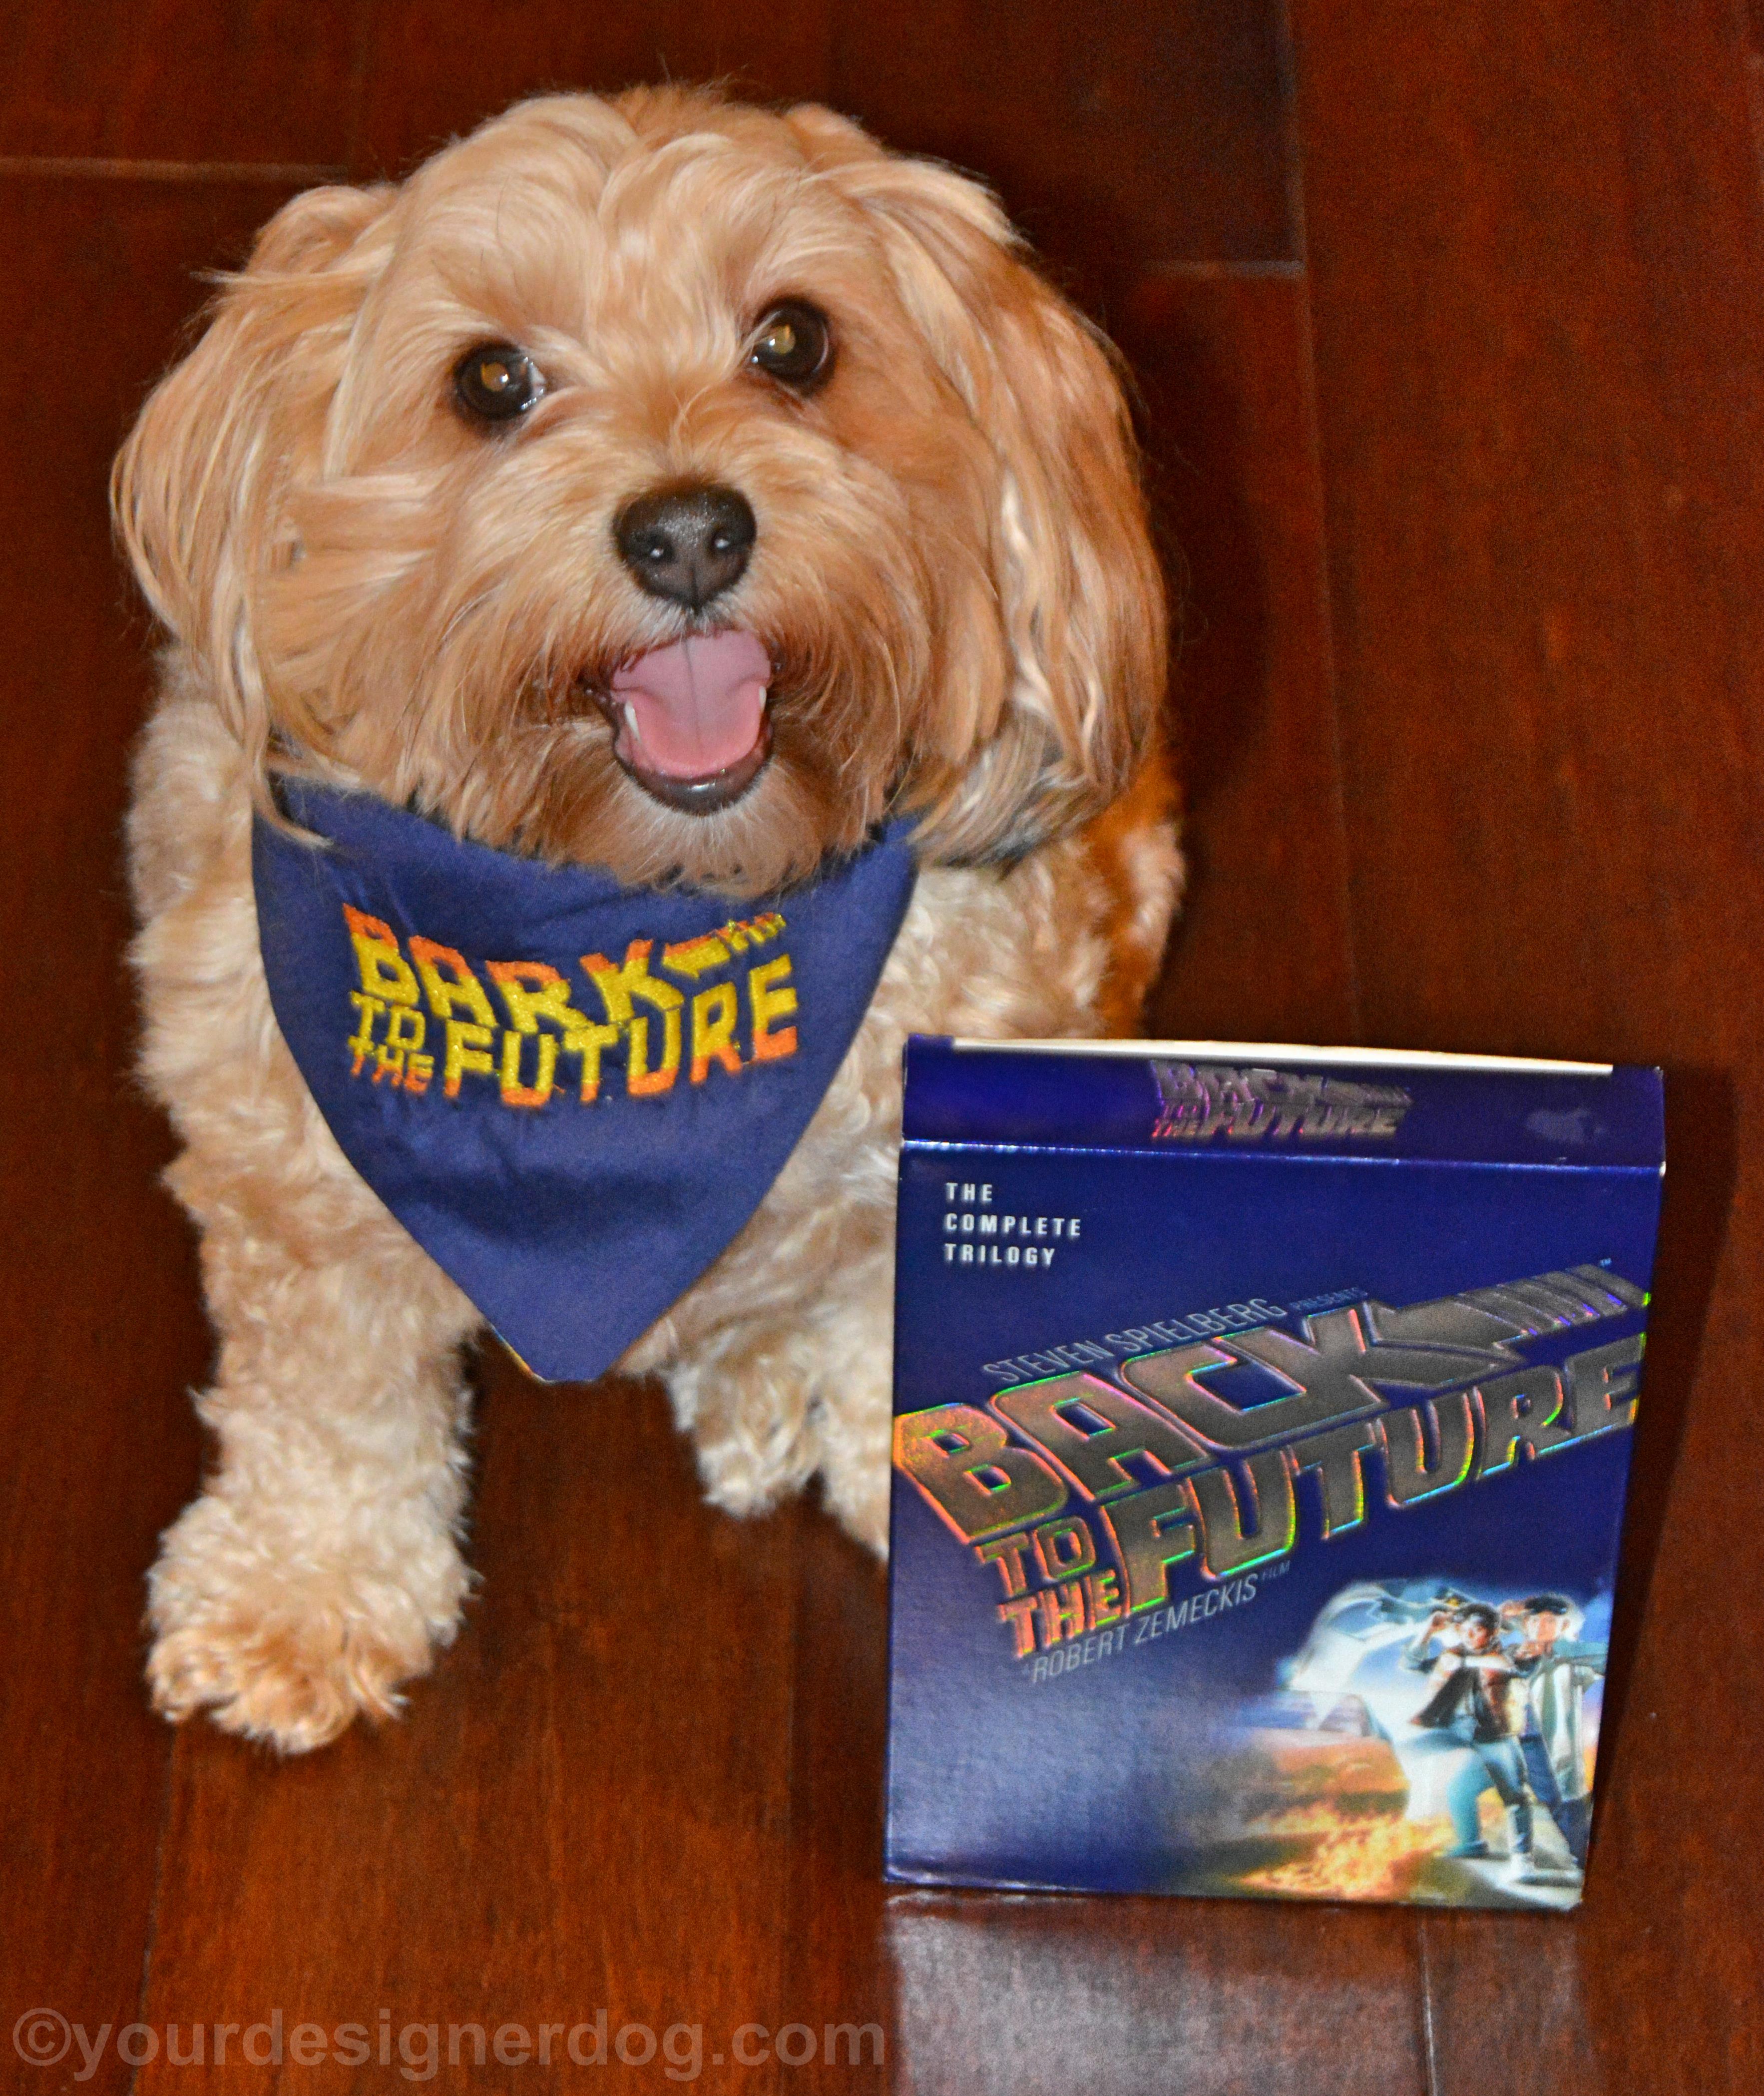 dogs, designer dogs, yorkipoo, yorkie poo, back to the future